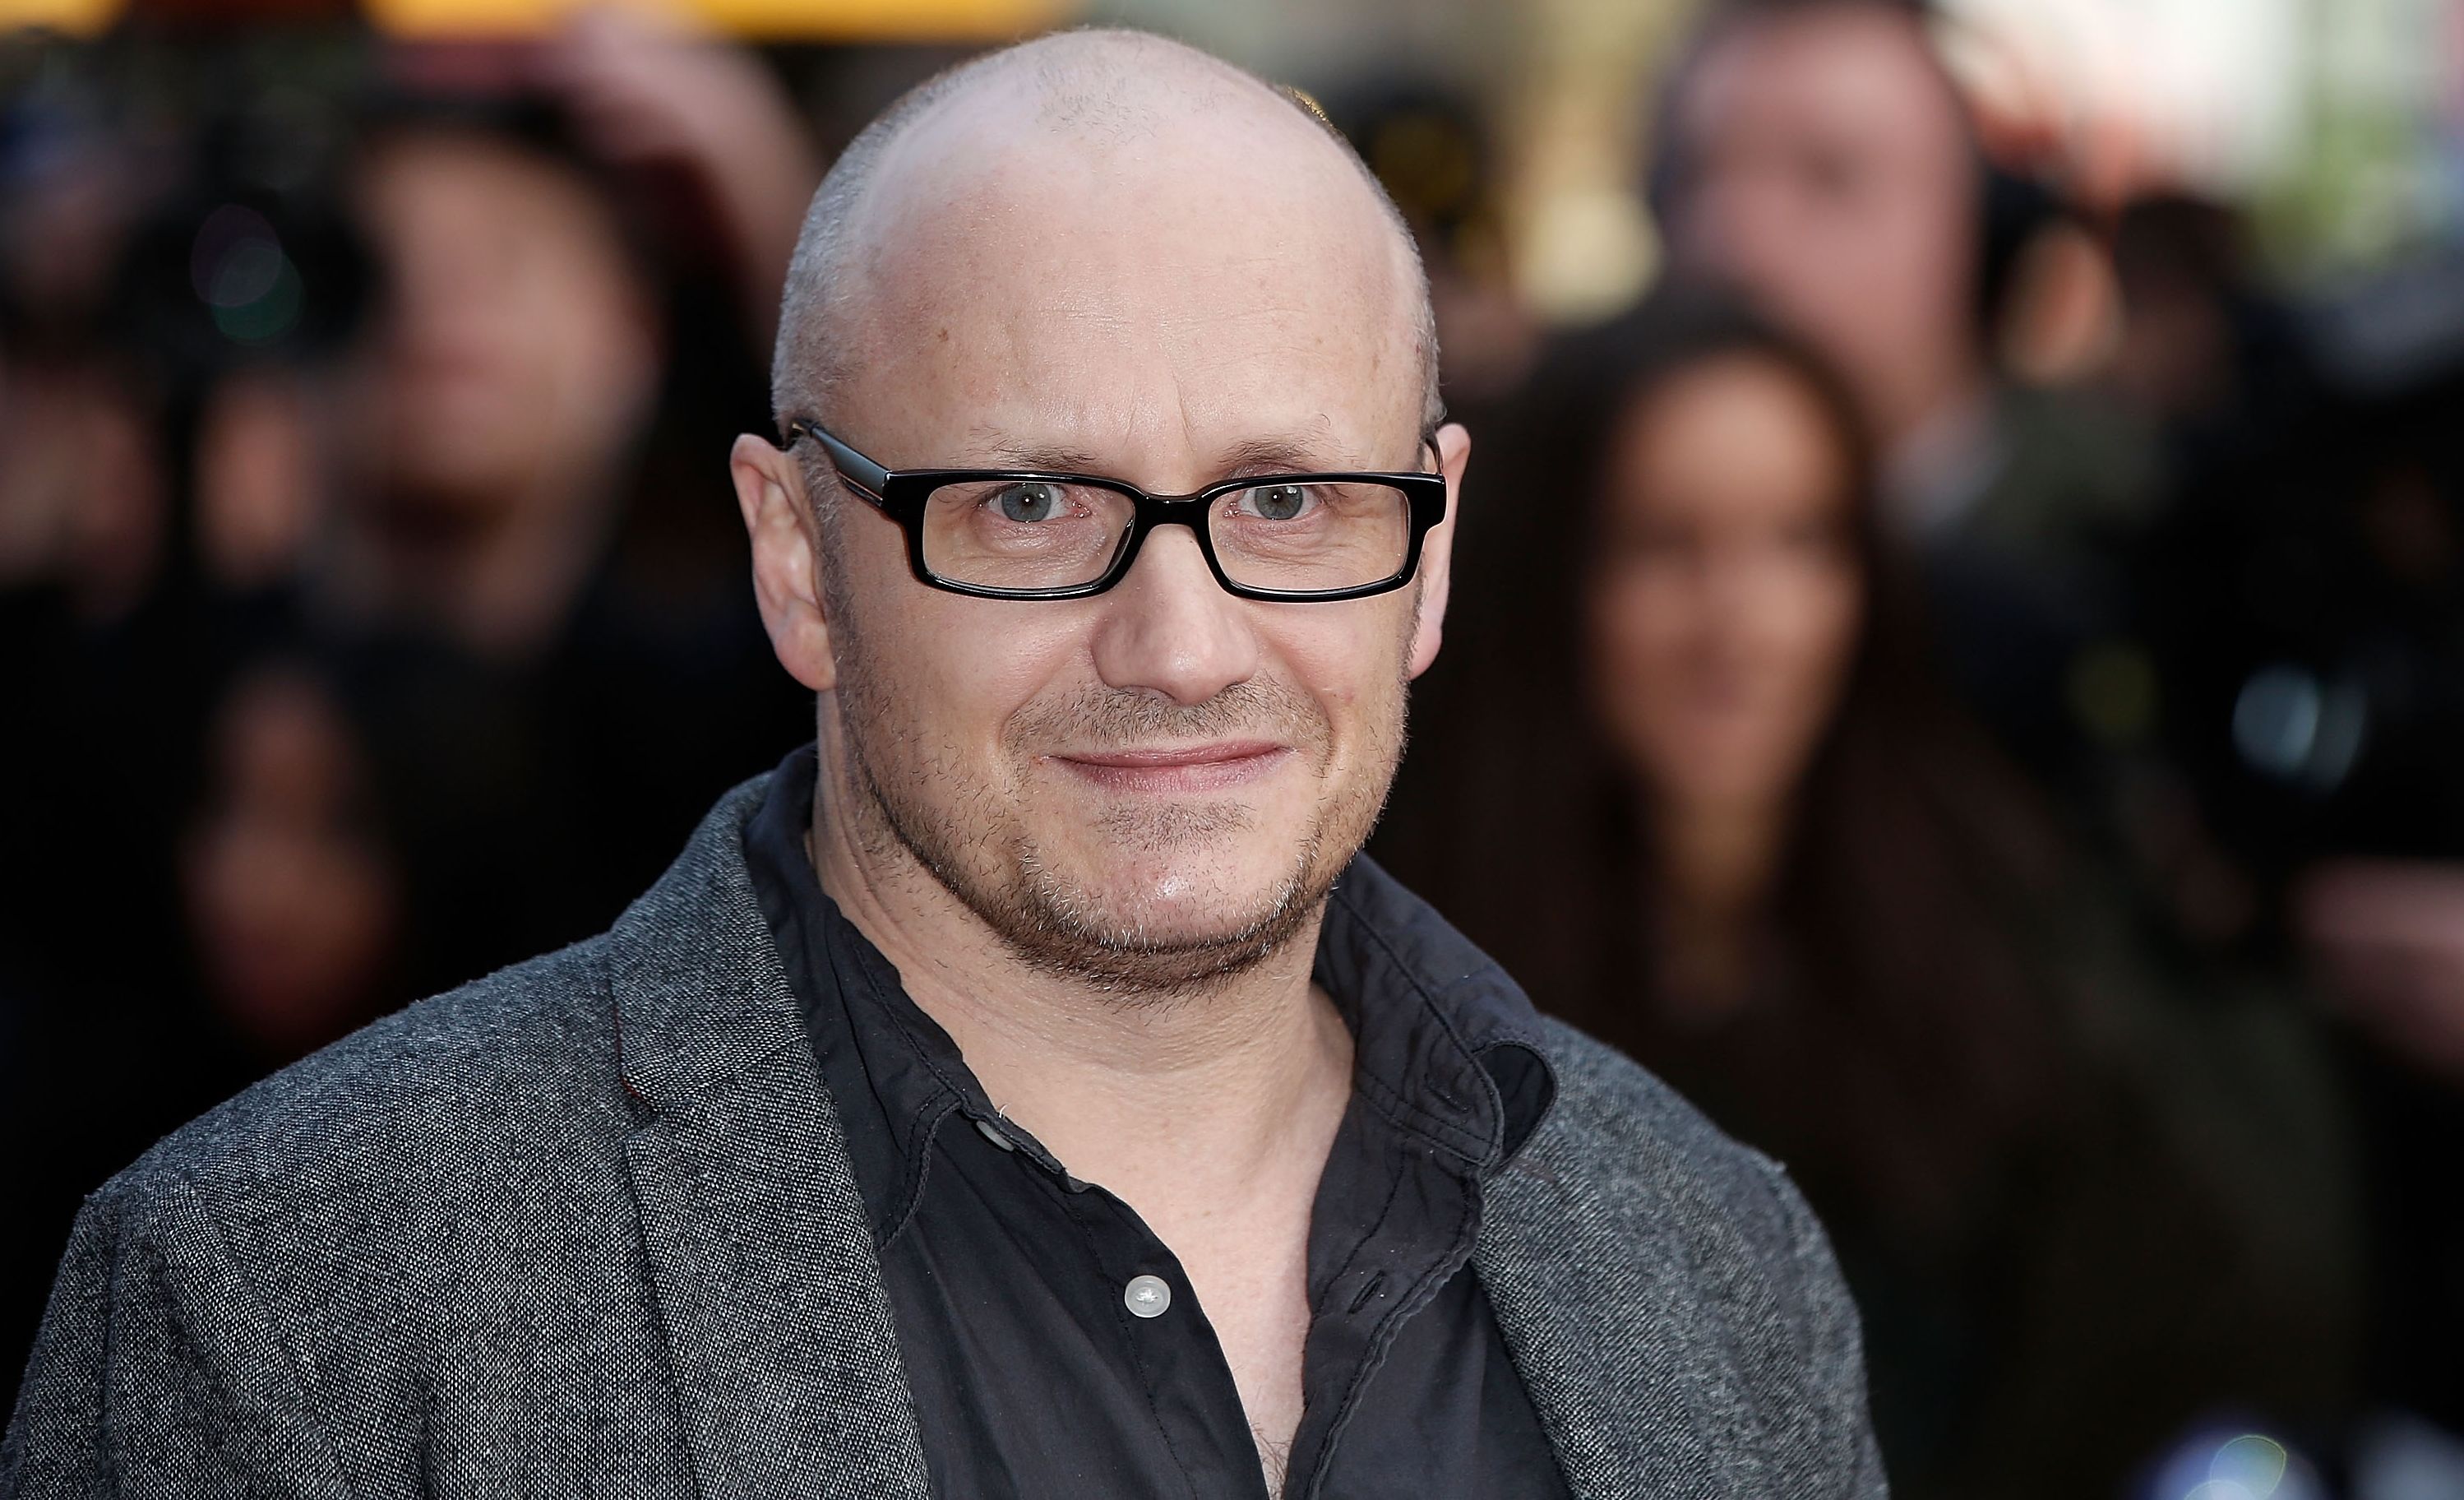 LONDON, ENGLAND - OCTOBER 11: Director Lenny Abrahamson attends a screening of "Room" during the BFI London Film Festival at Vue Leicester Square on October 11, 2015 in London, England. (Photo by John Phillips/Getty Images for BFI)